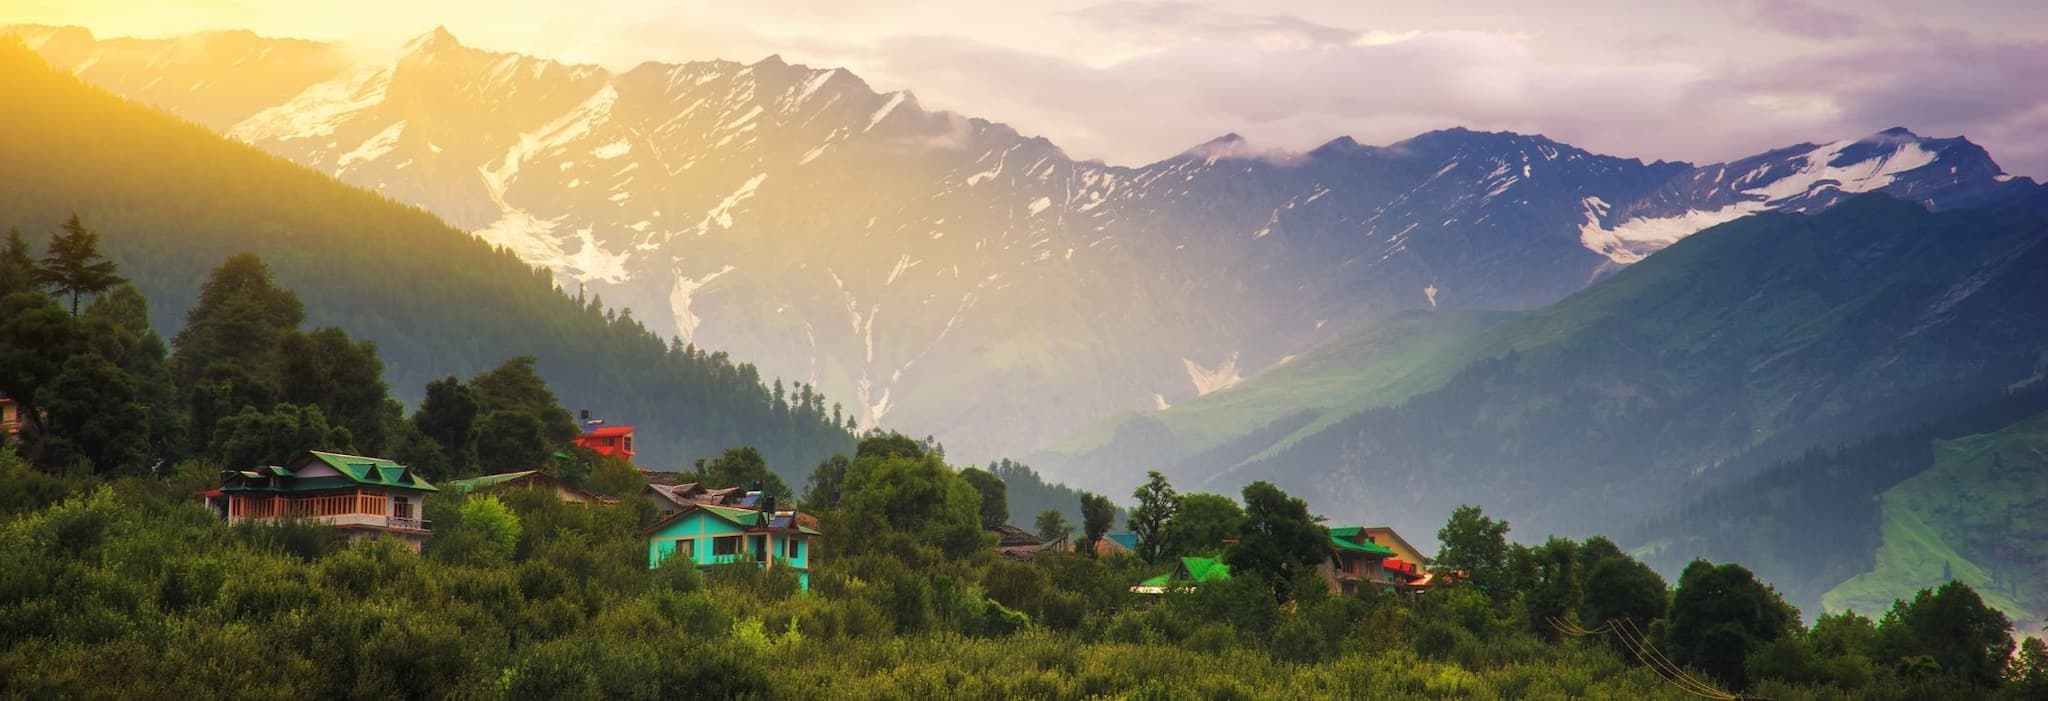 The Complete Manali guide 